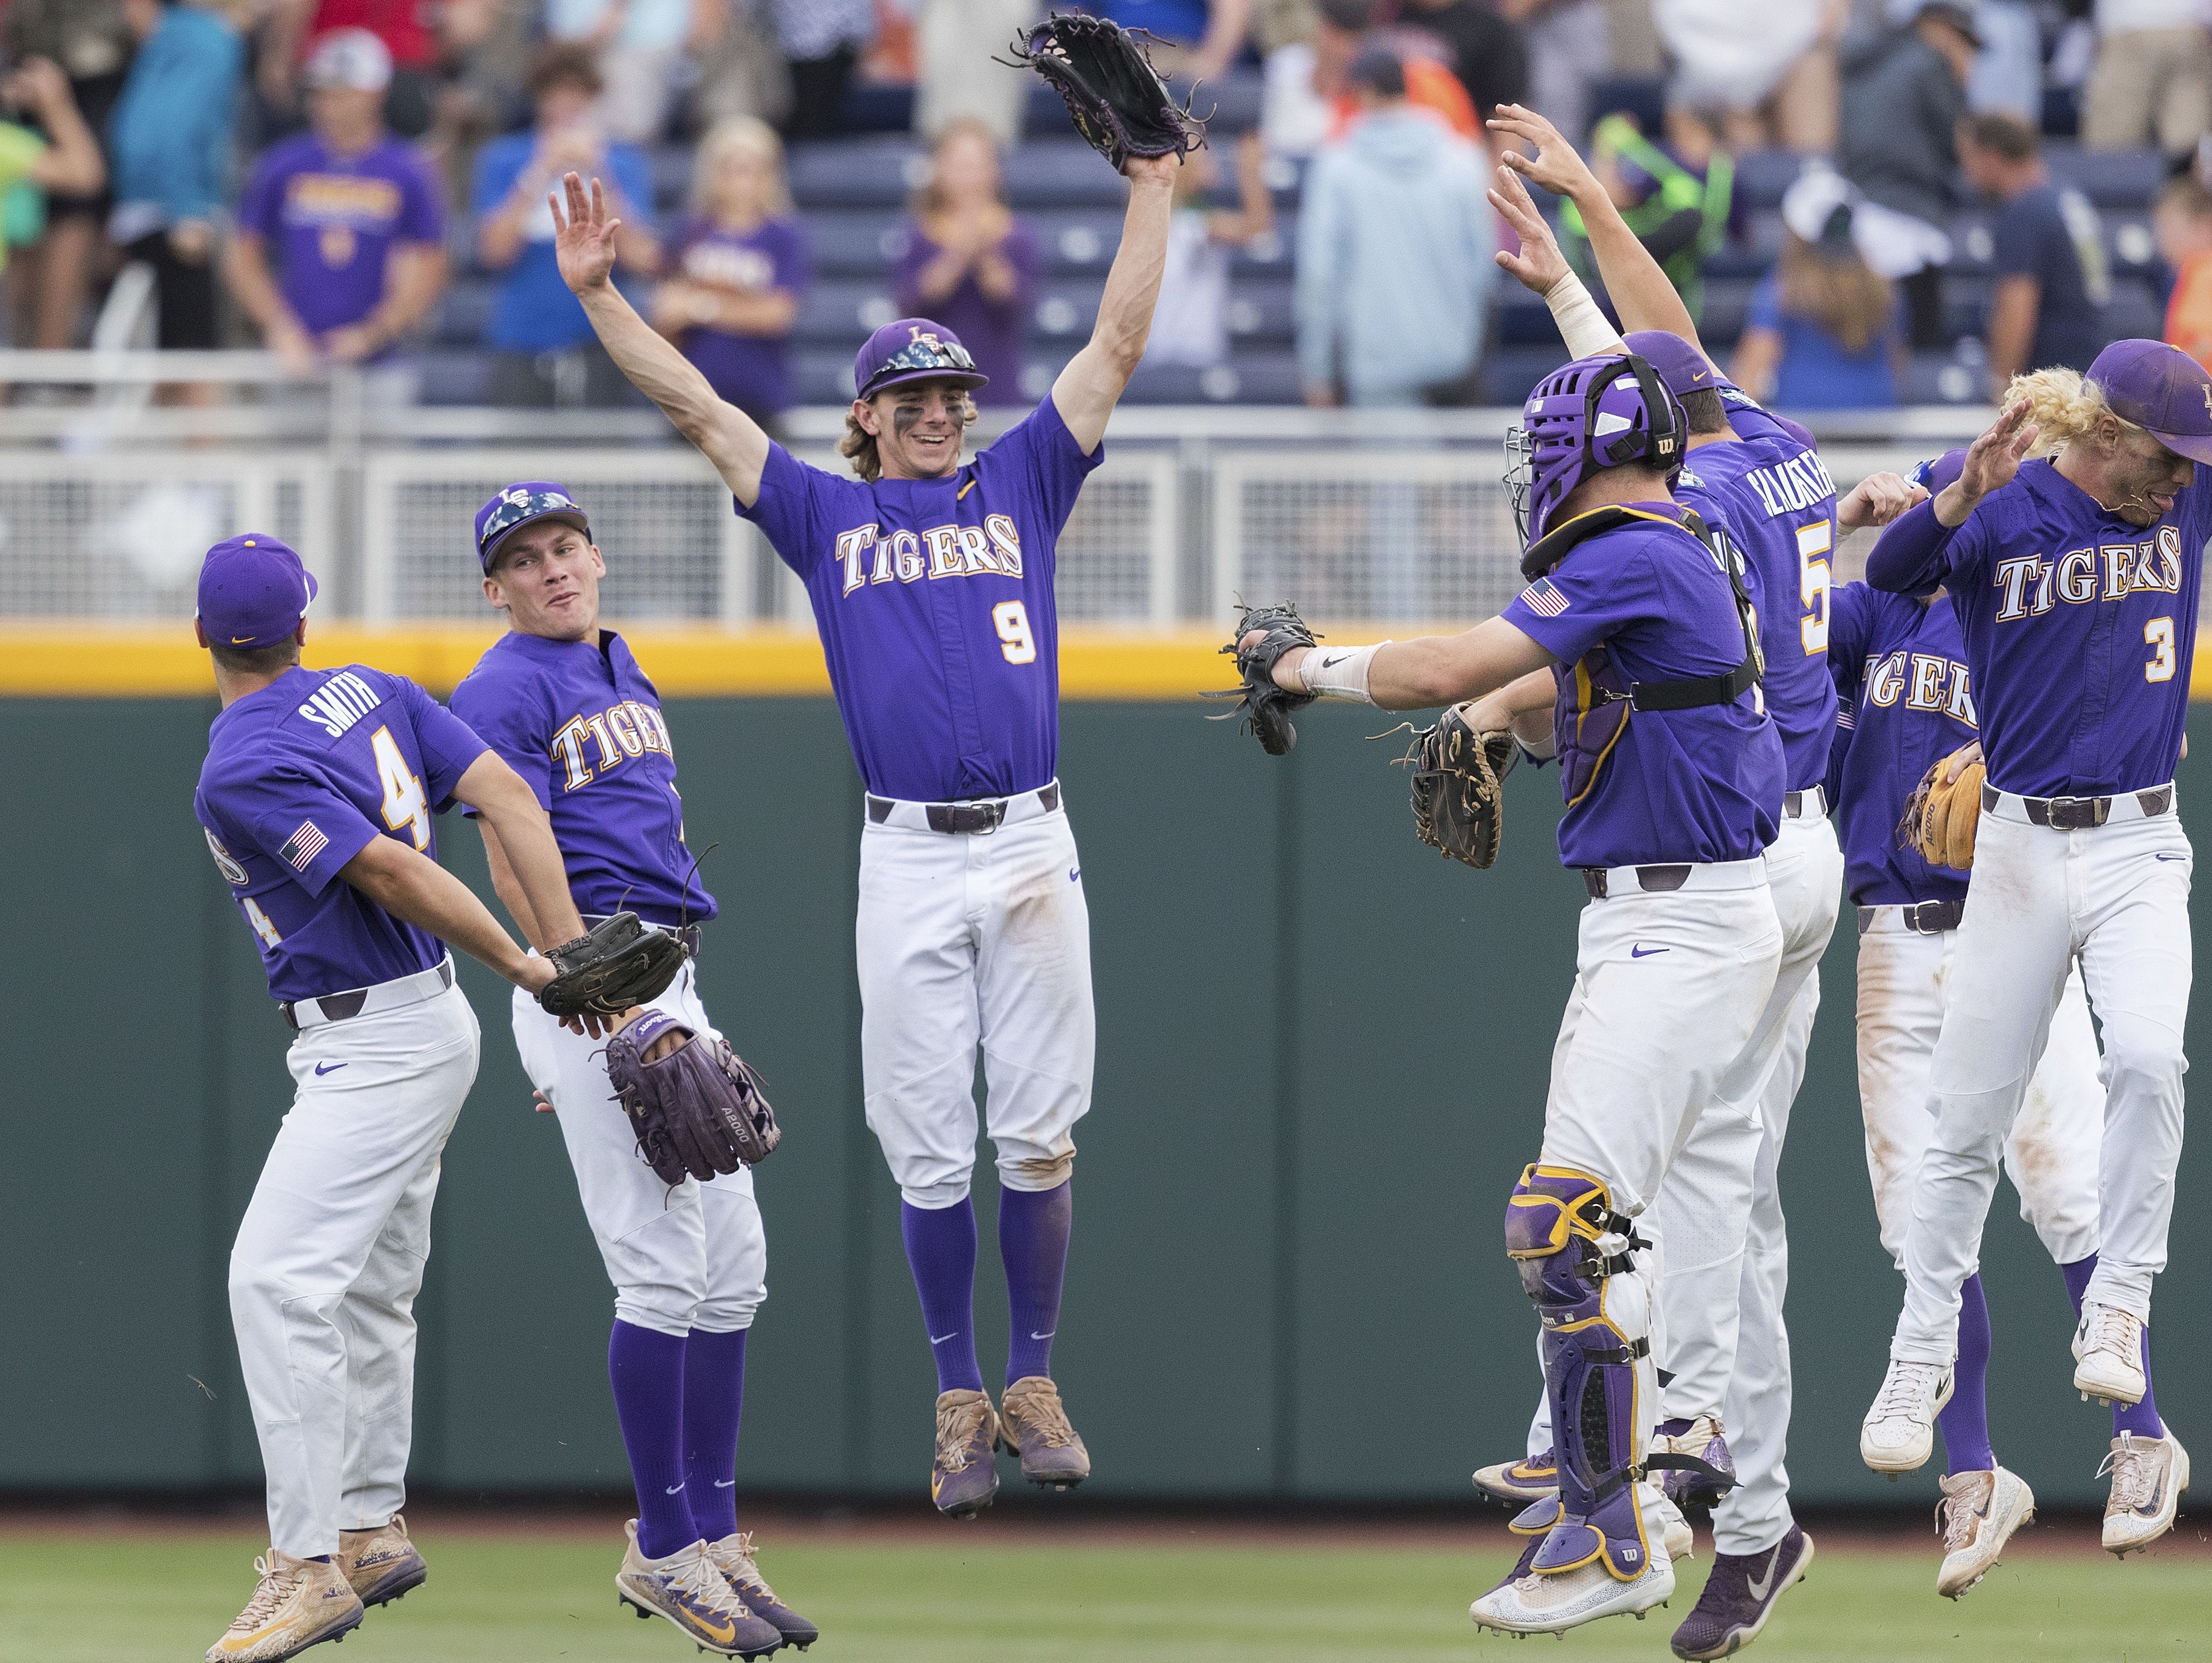 Lsu Next Baseball Game This Time It Was Against The Team That Put Them